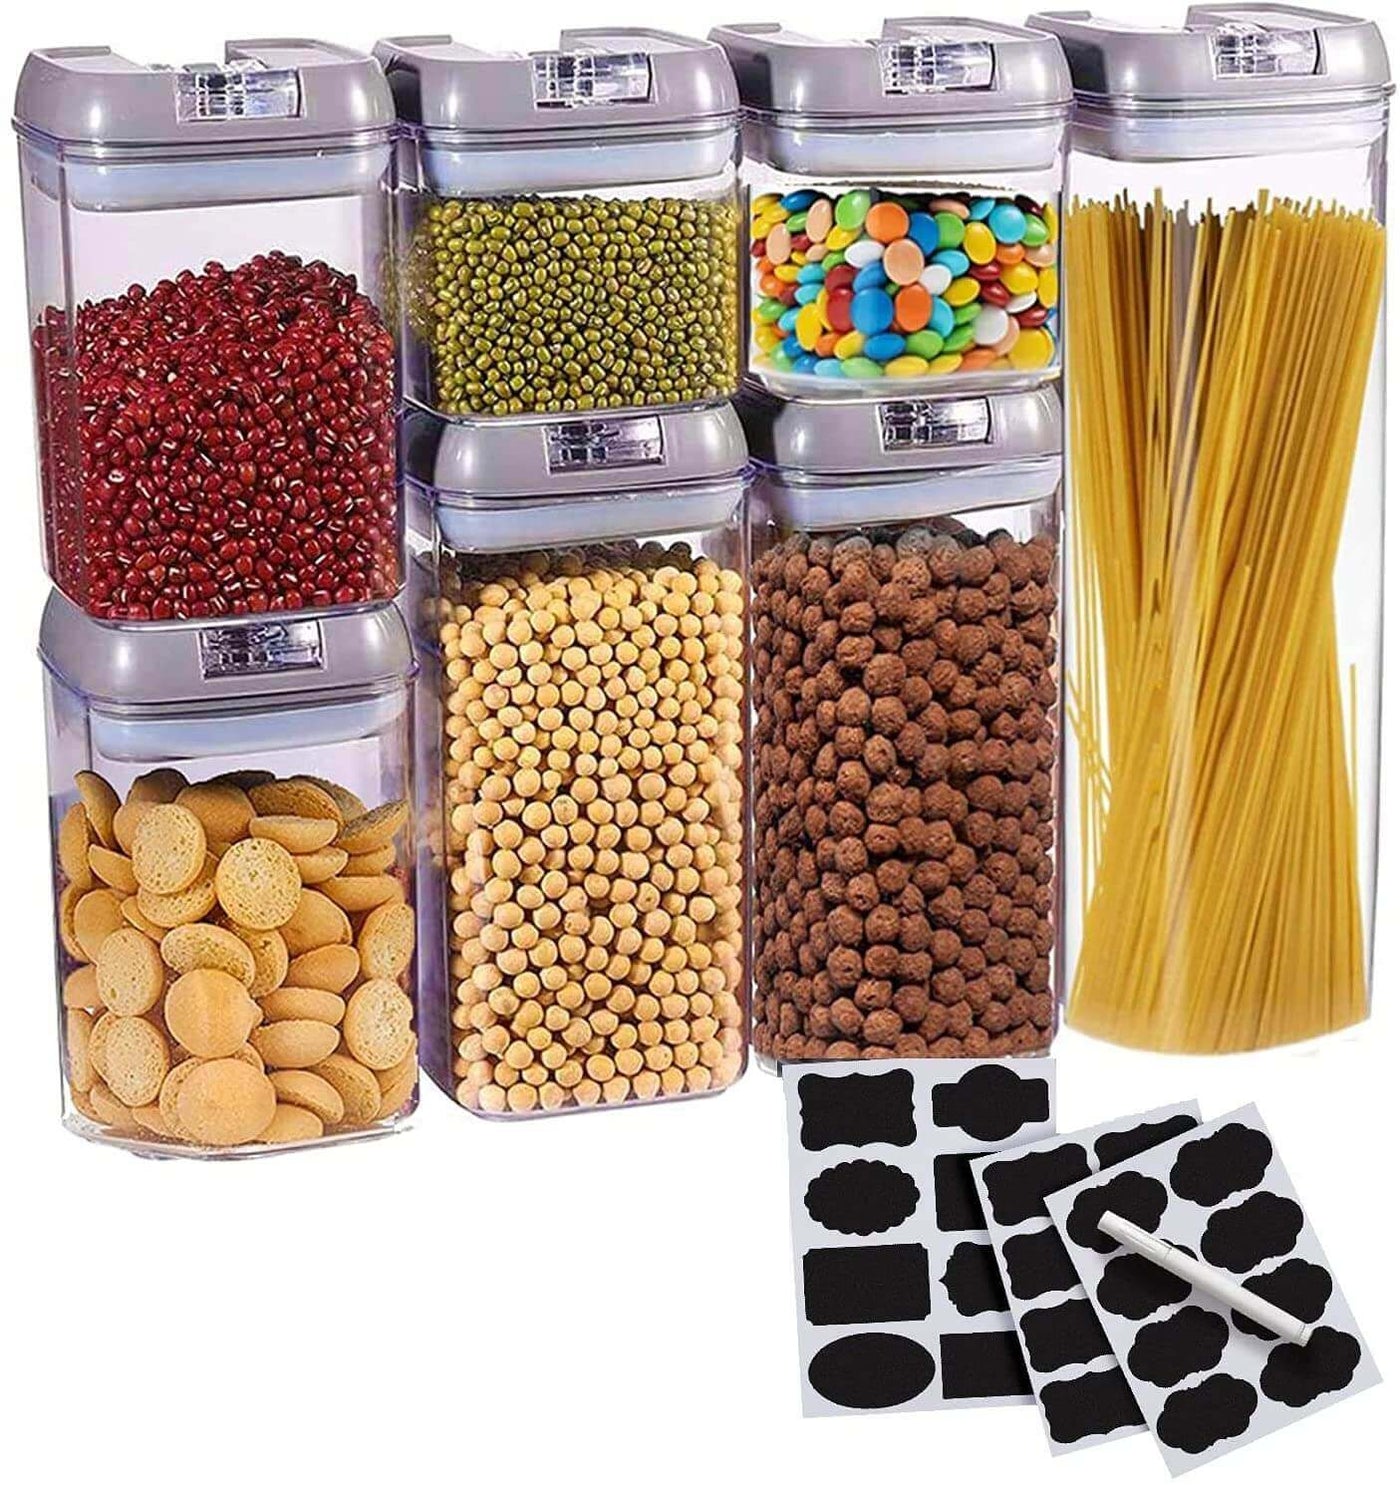 Airtight Food Storage Containers for Pantry Organization and